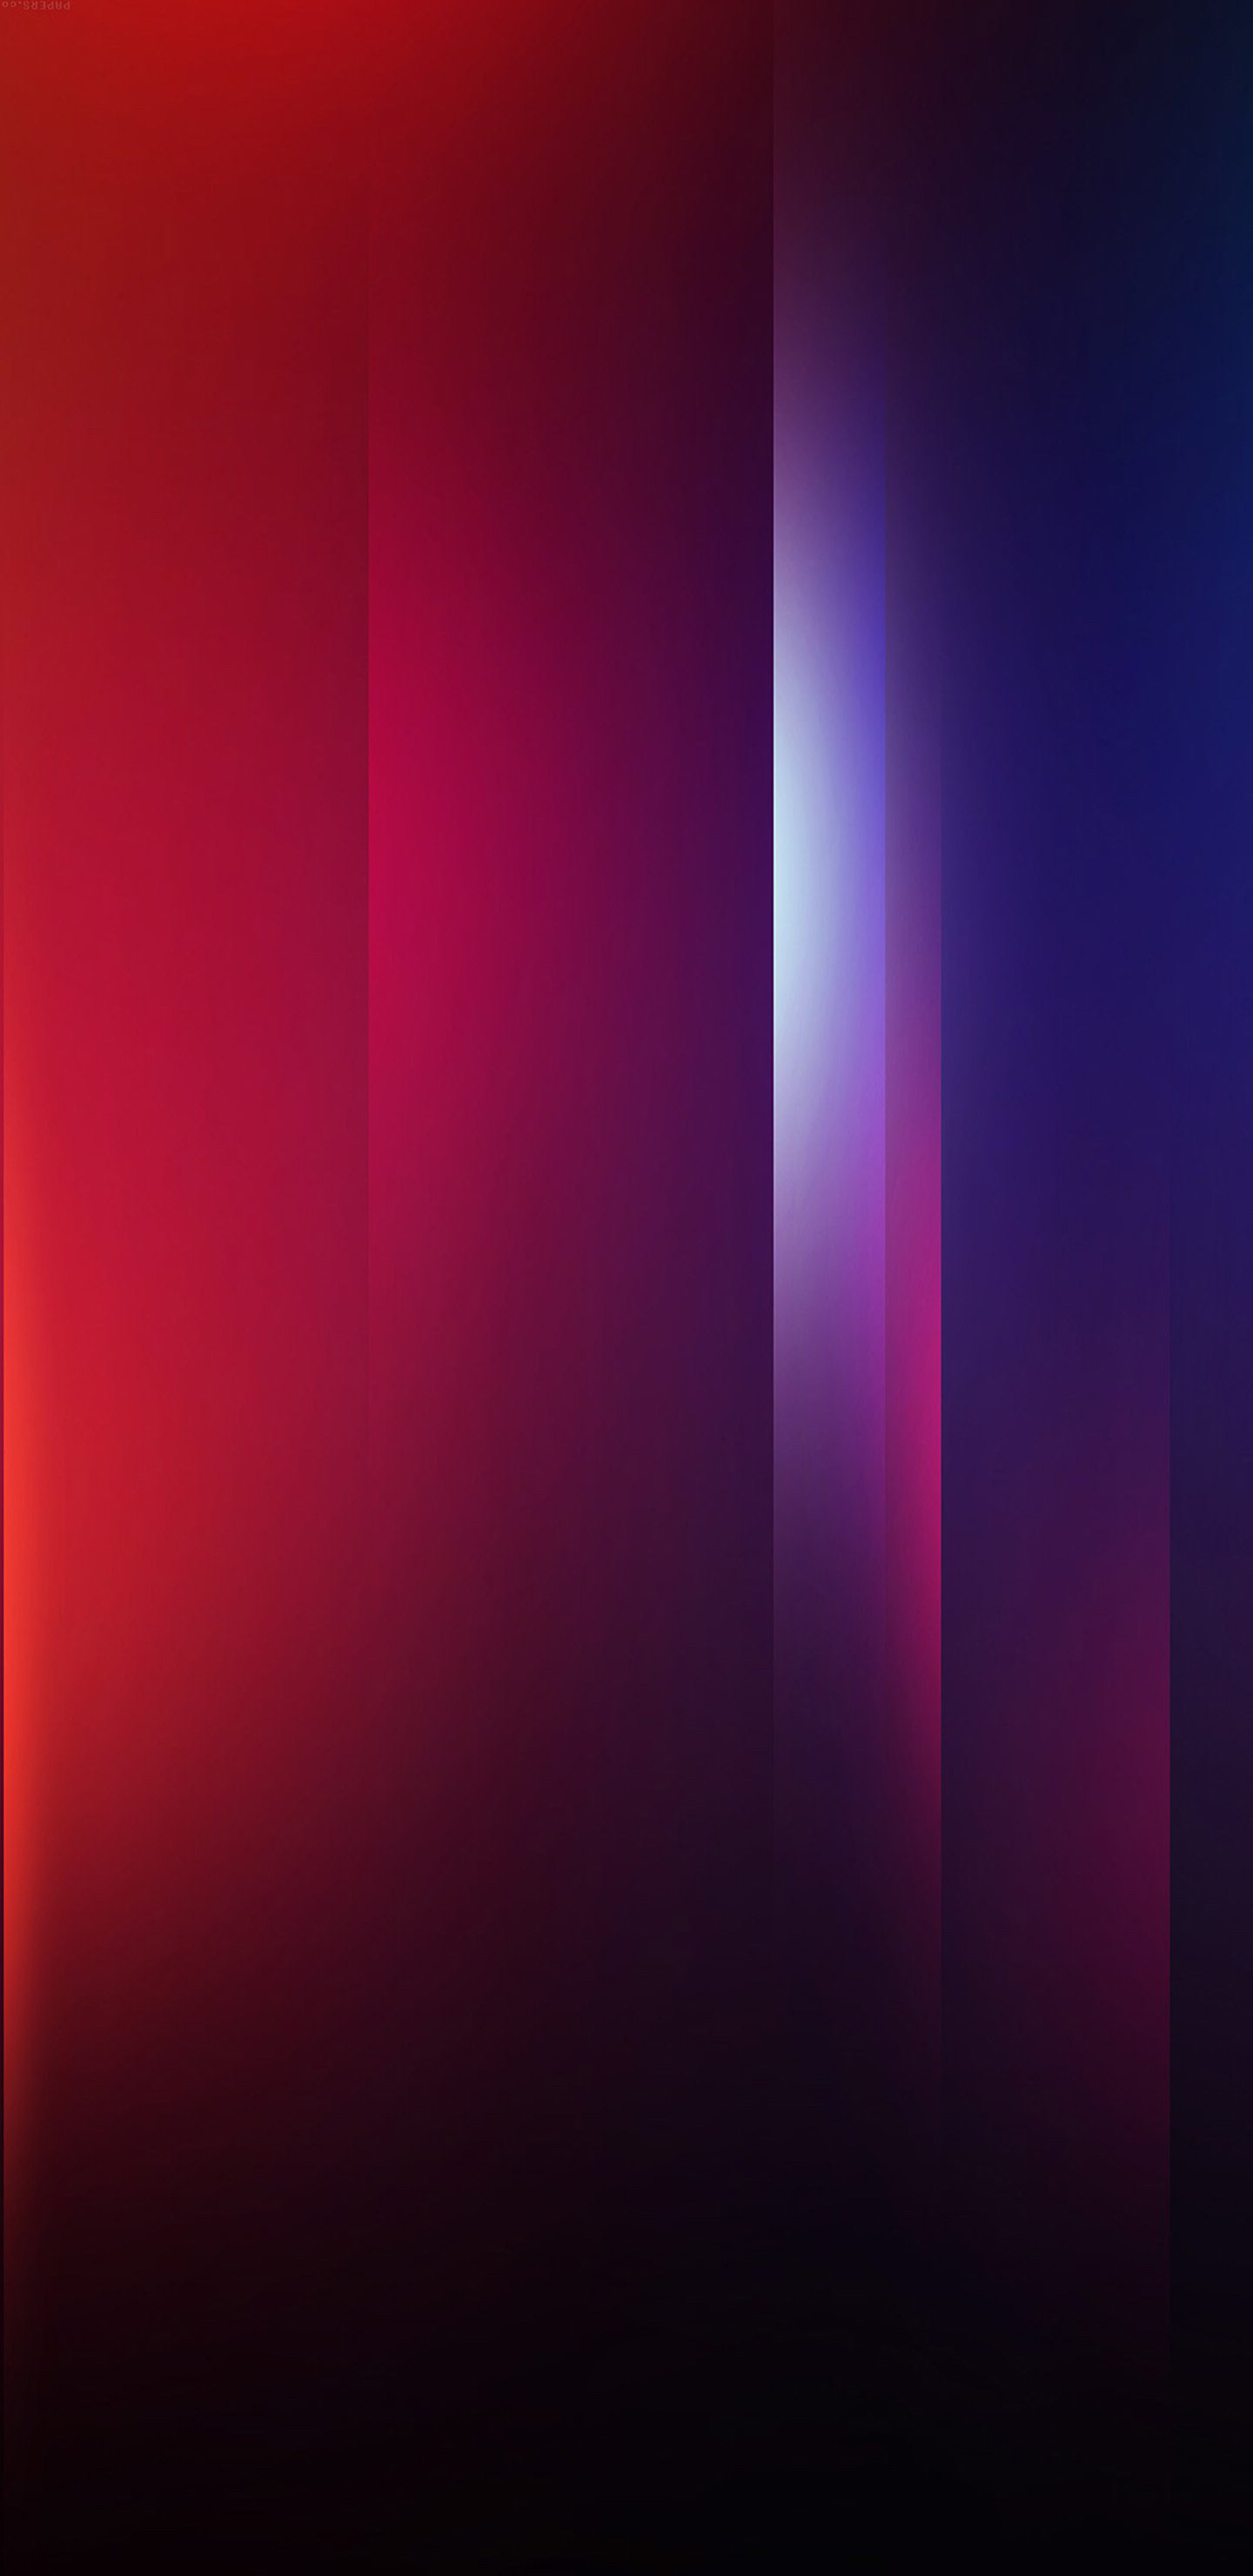 Blue, red, purple, minimal, abstract, wallpaper, galaxy, clean,